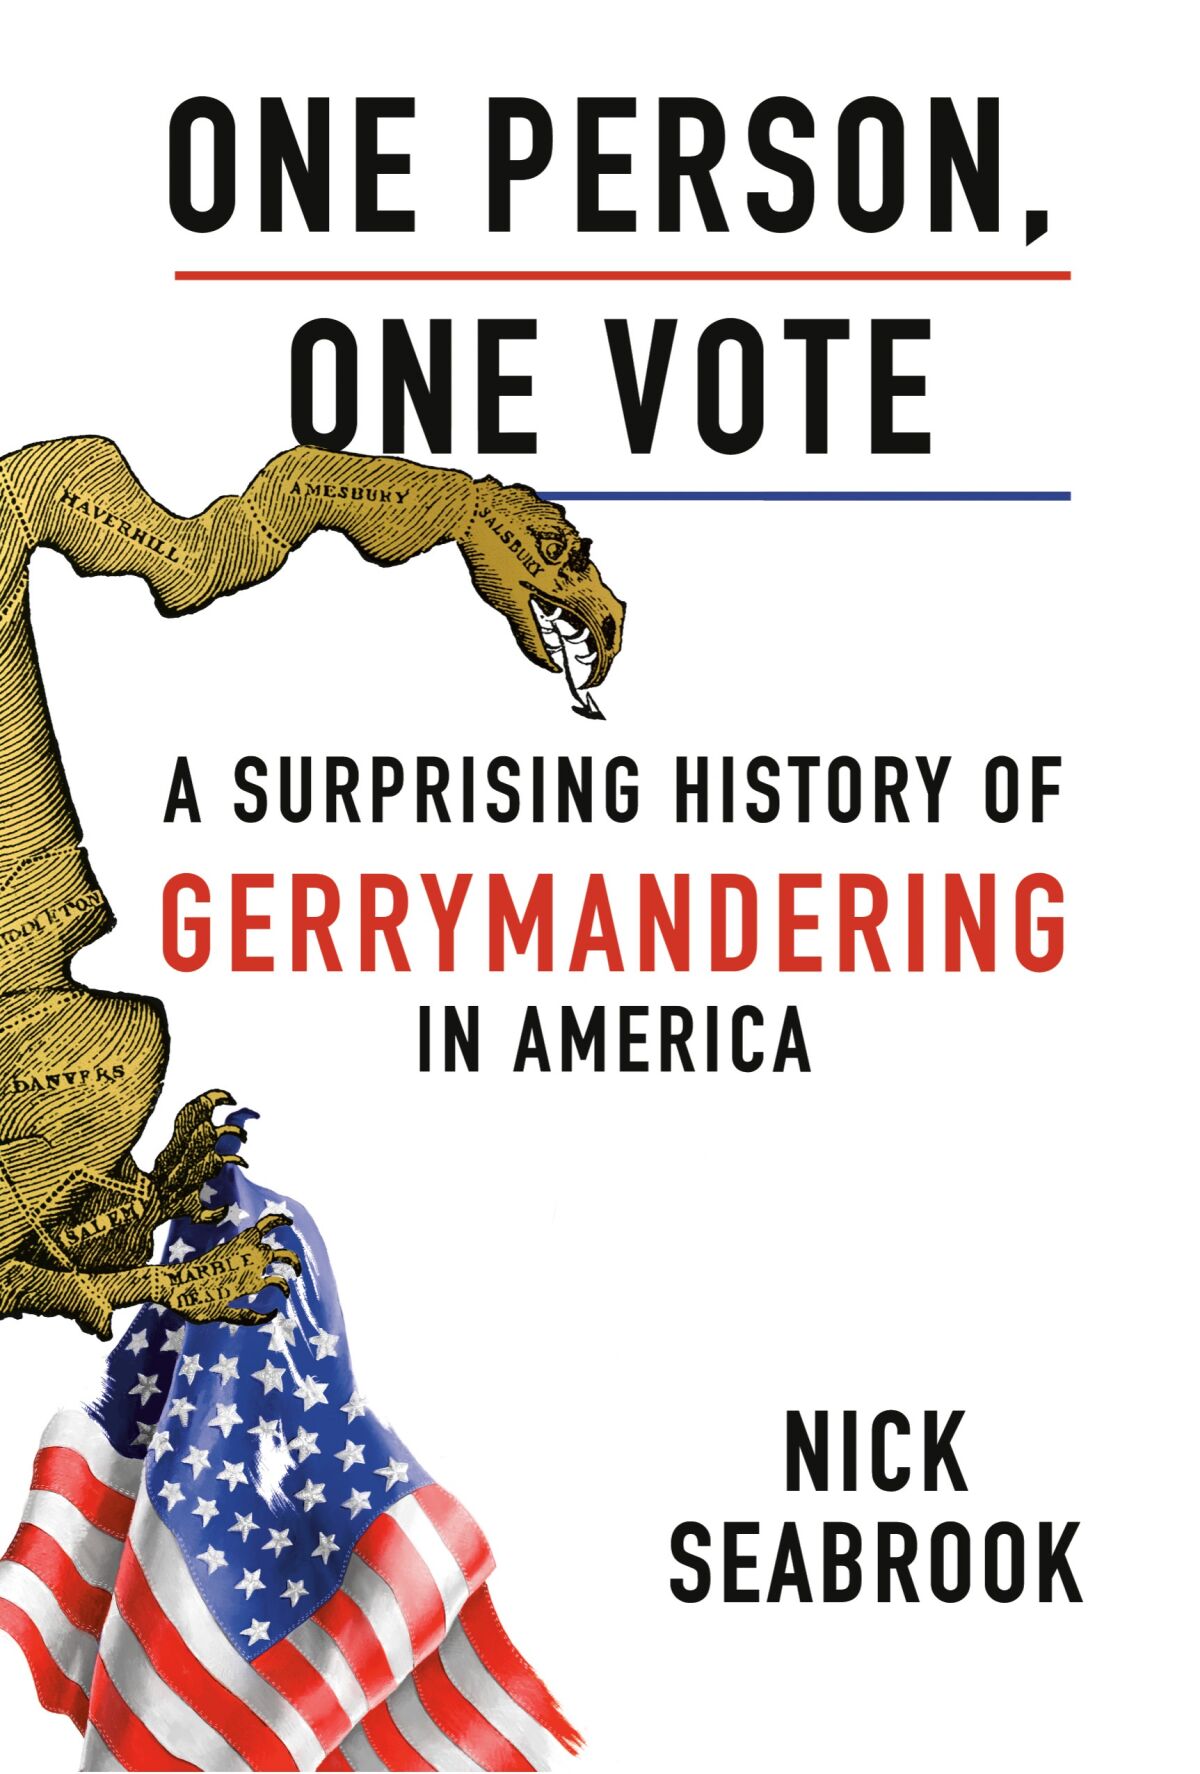 "One Person, One Vote: A Surprising History of Gerrymandering in America" by Nick Seabrook